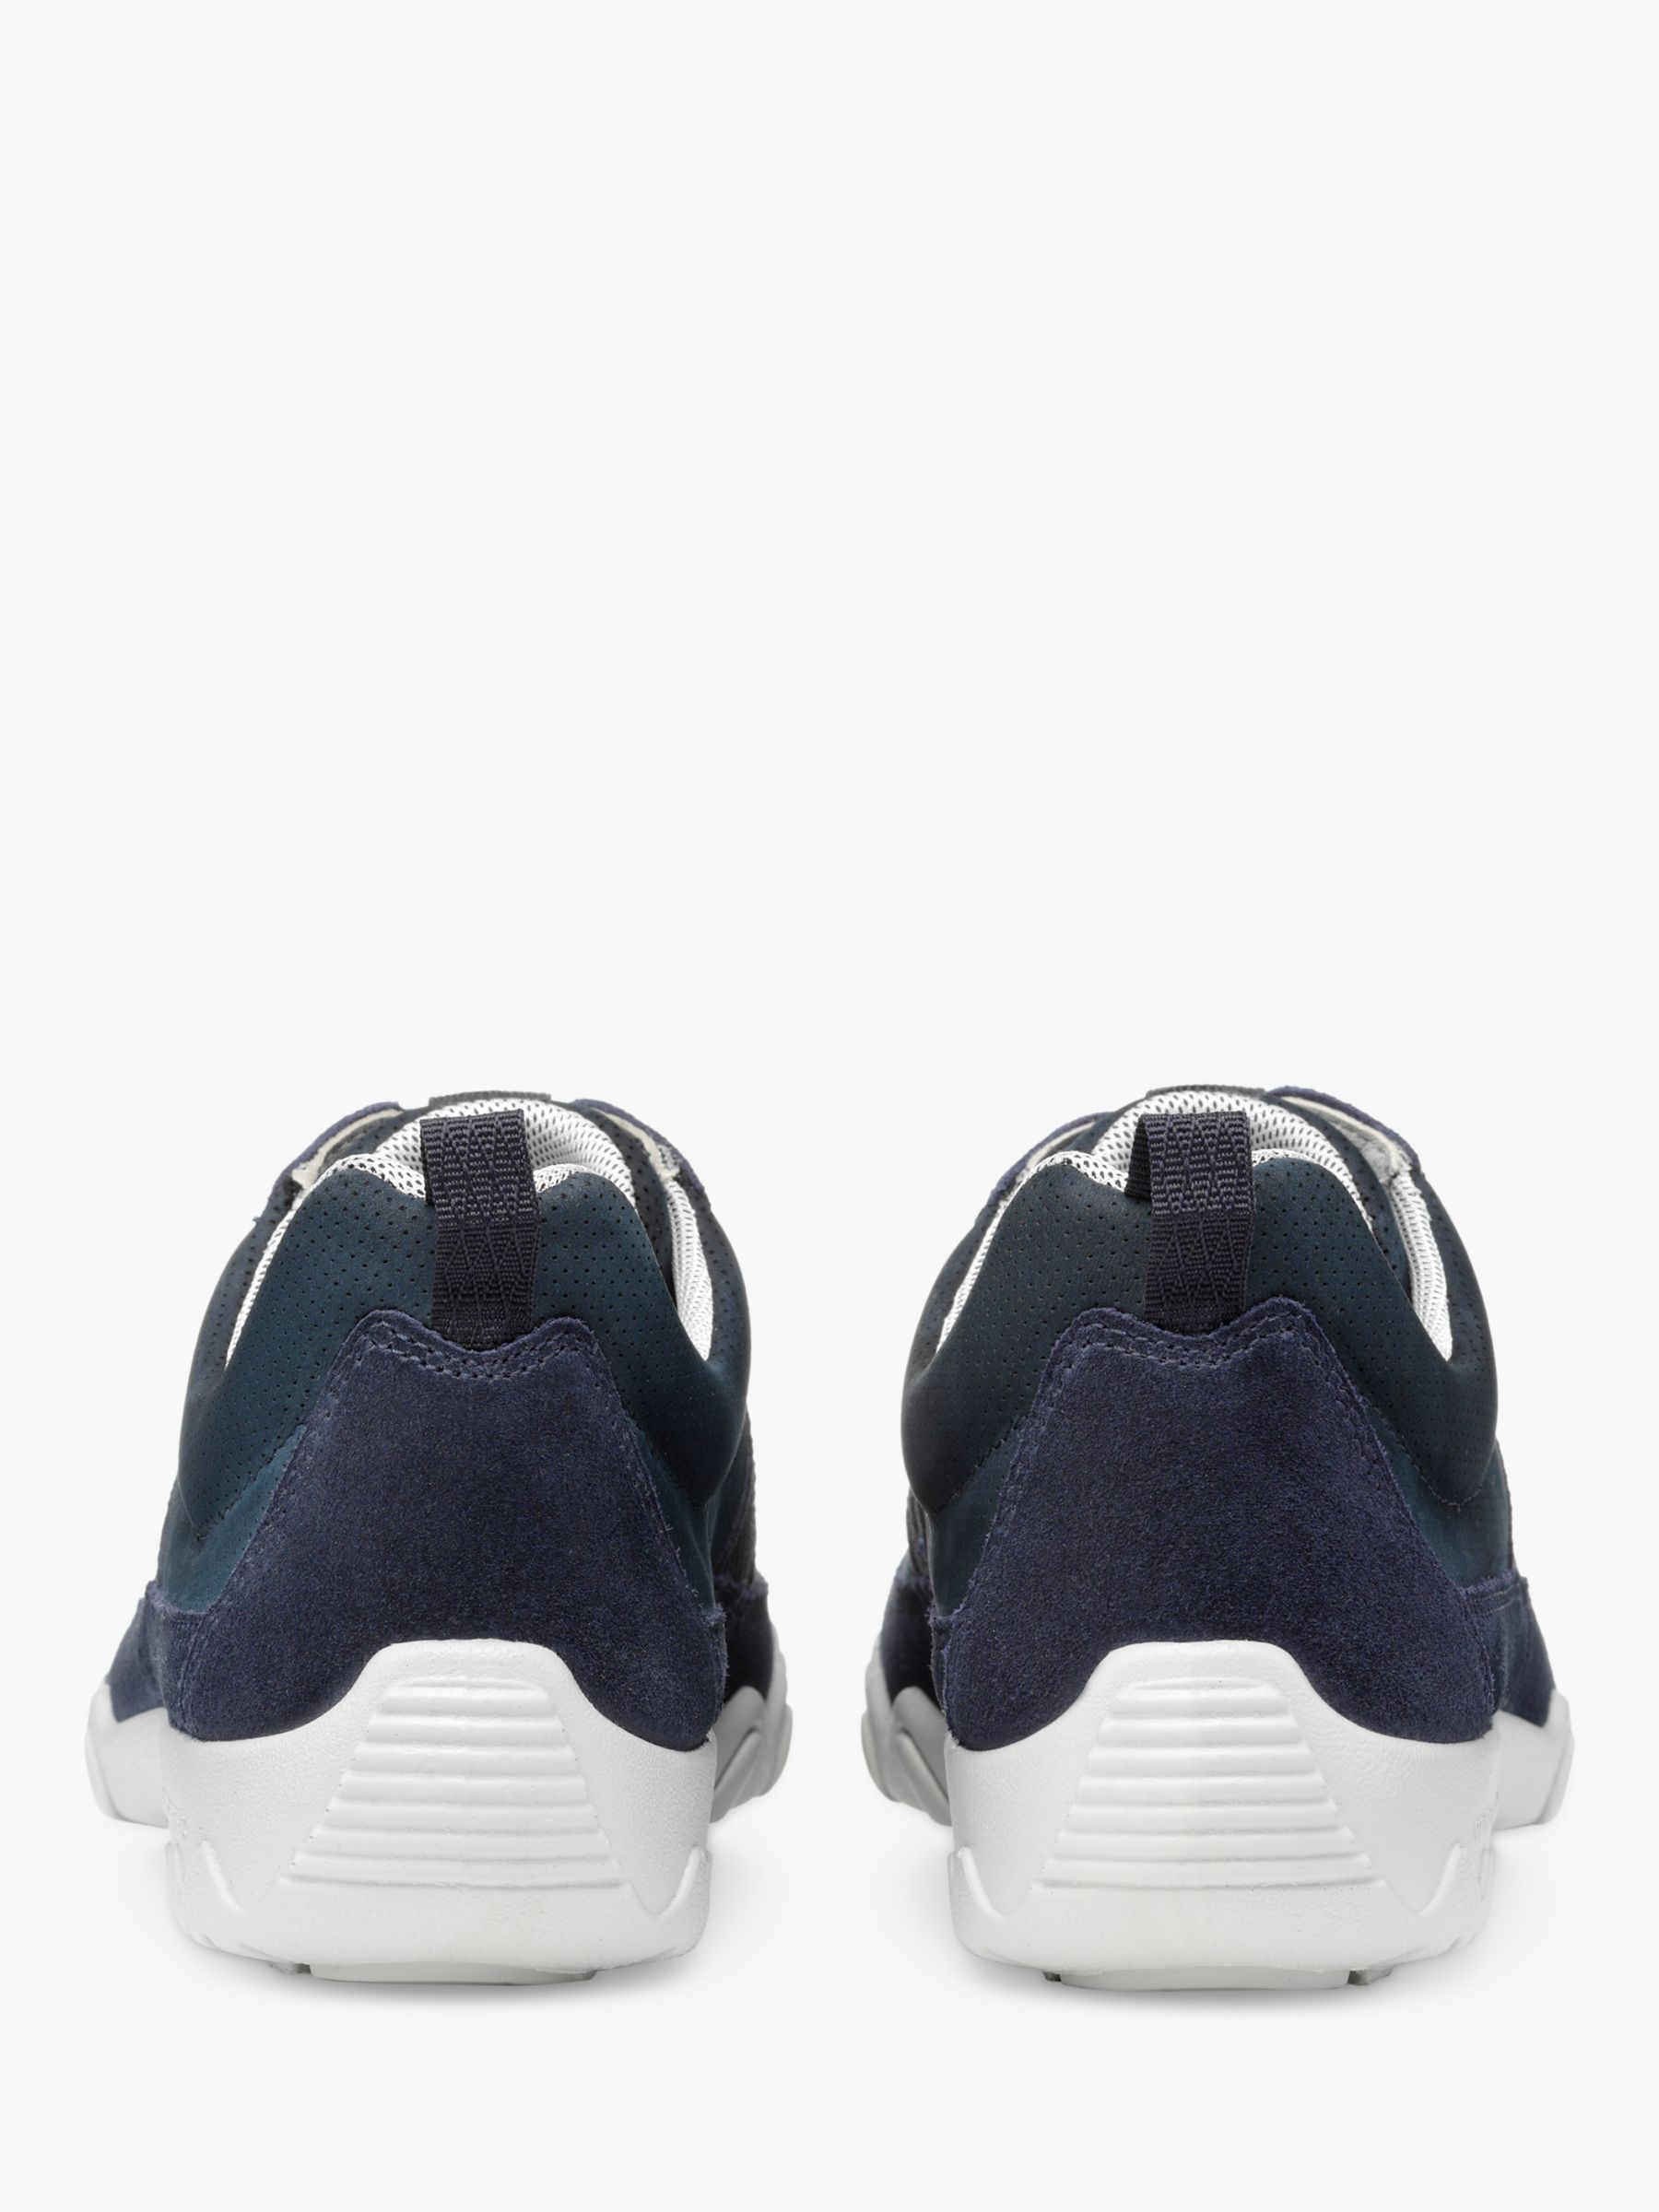 Buy Hotter Leanne II Suede and Nubuck Trainers, Navy Online at johnlewis.com